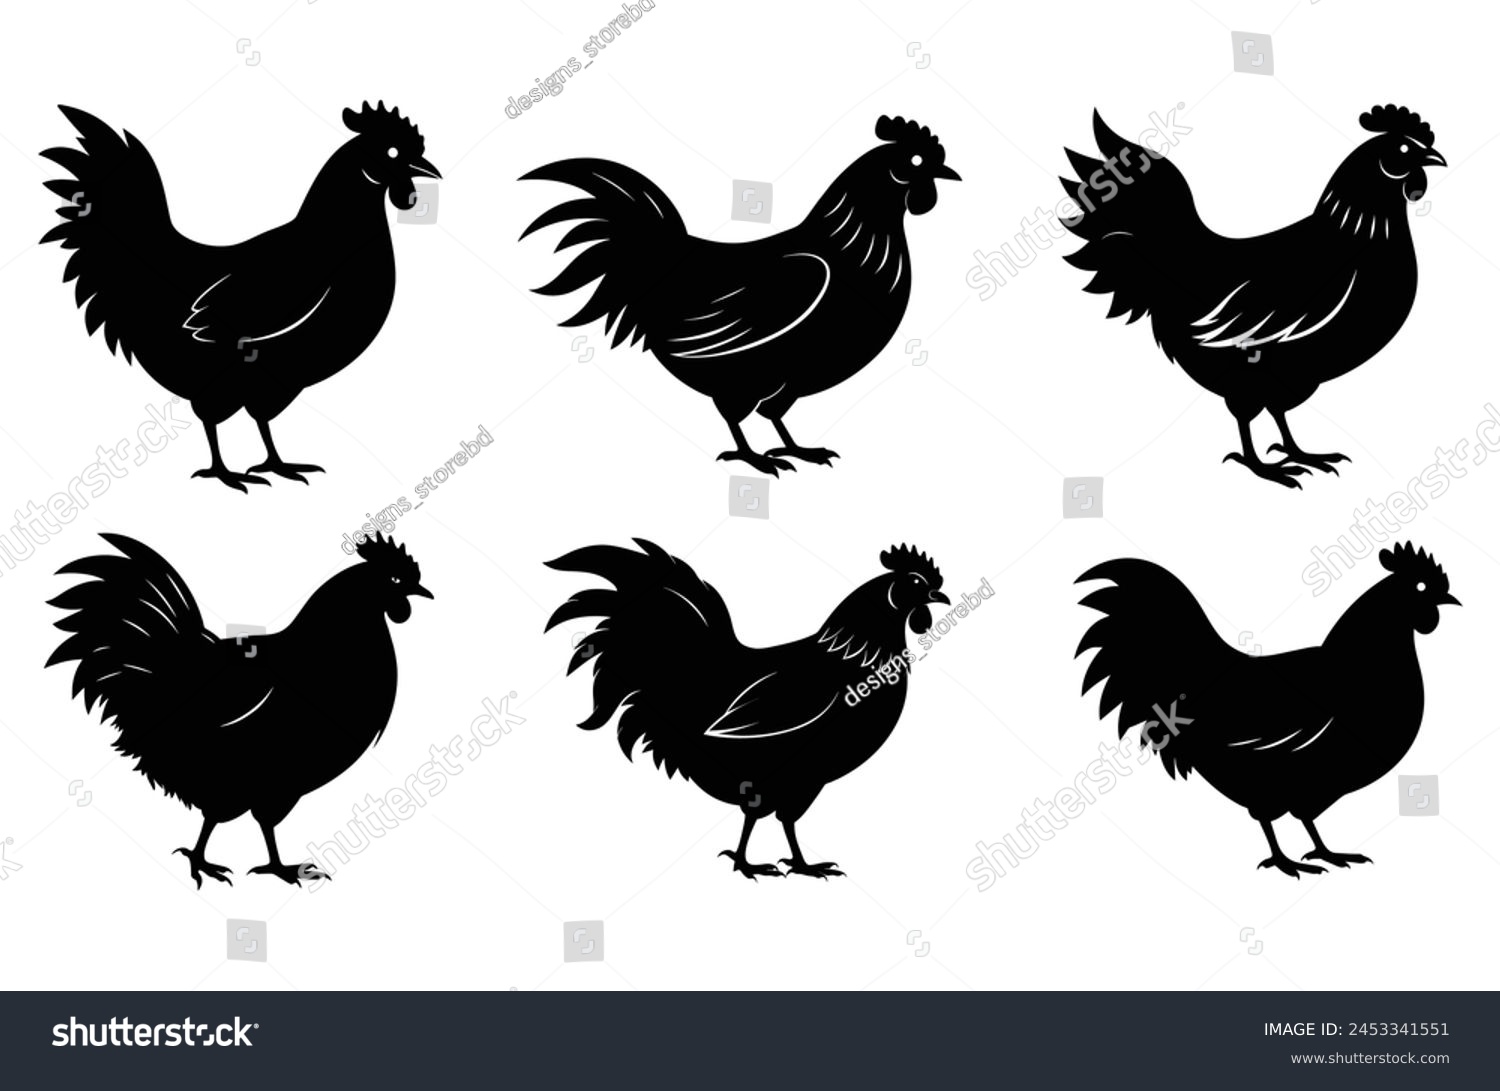 SVG of Chicken silhouette vector illustration With on white background svg